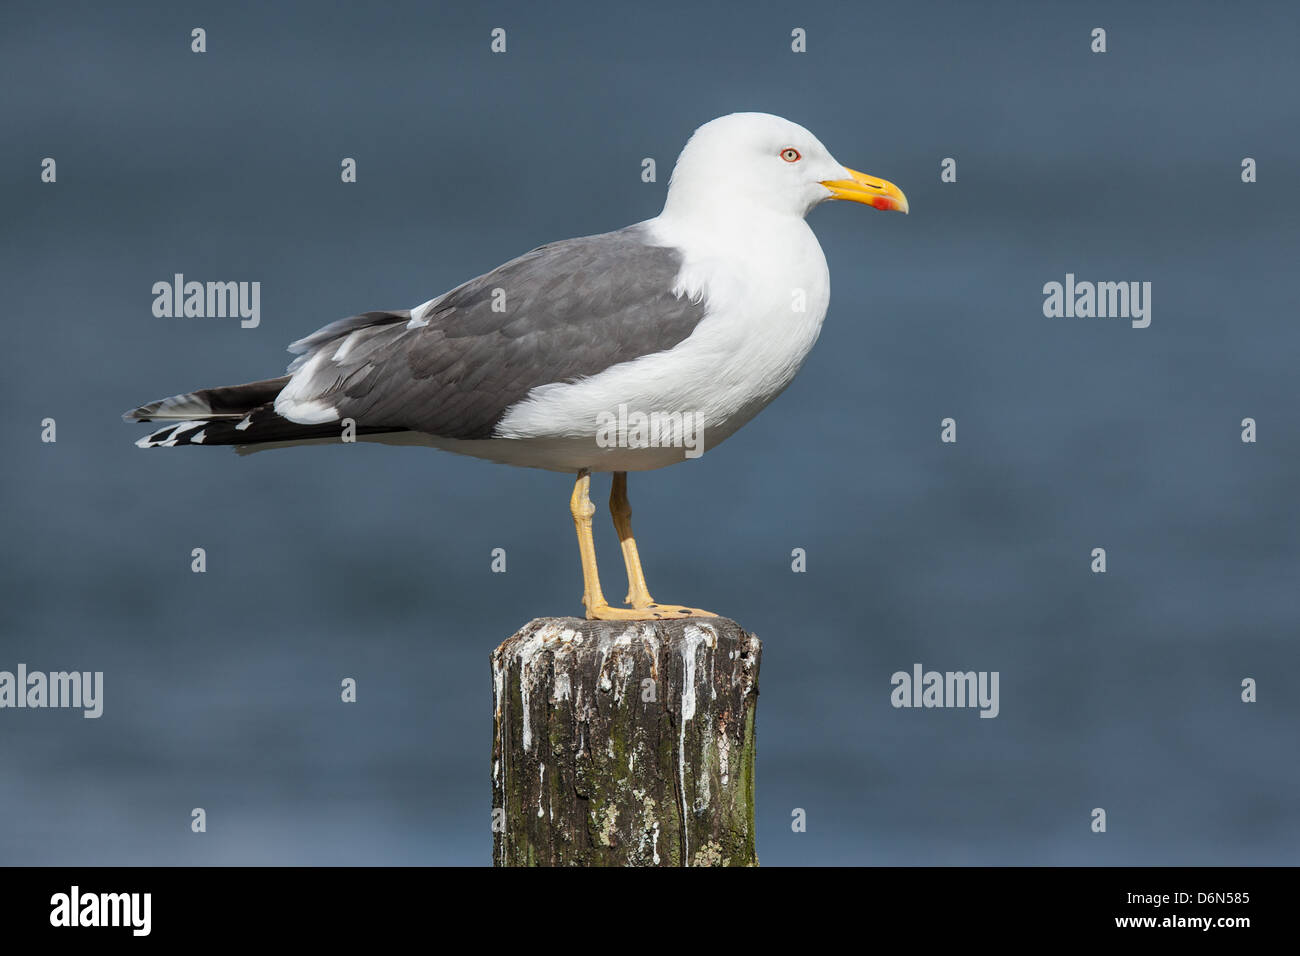 Adult Lesser Black-backed Gull (Larus fuscus) perched on post, Cumbria Stock Photo